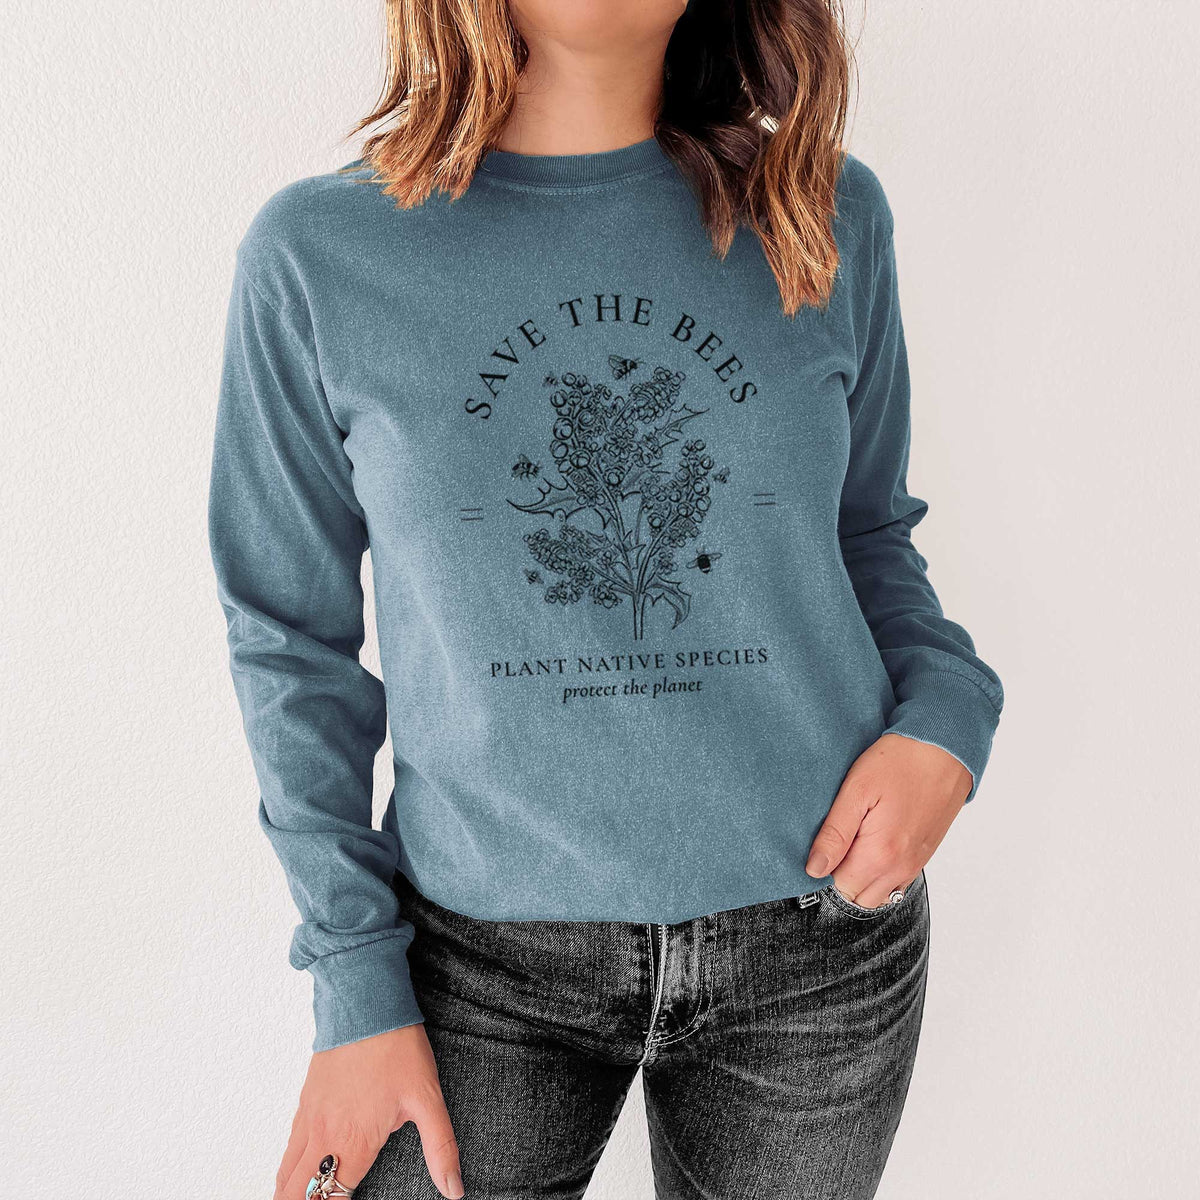 Save the Bees - Plant Native Species - Heavyweight 100% Cotton Long Sleeve